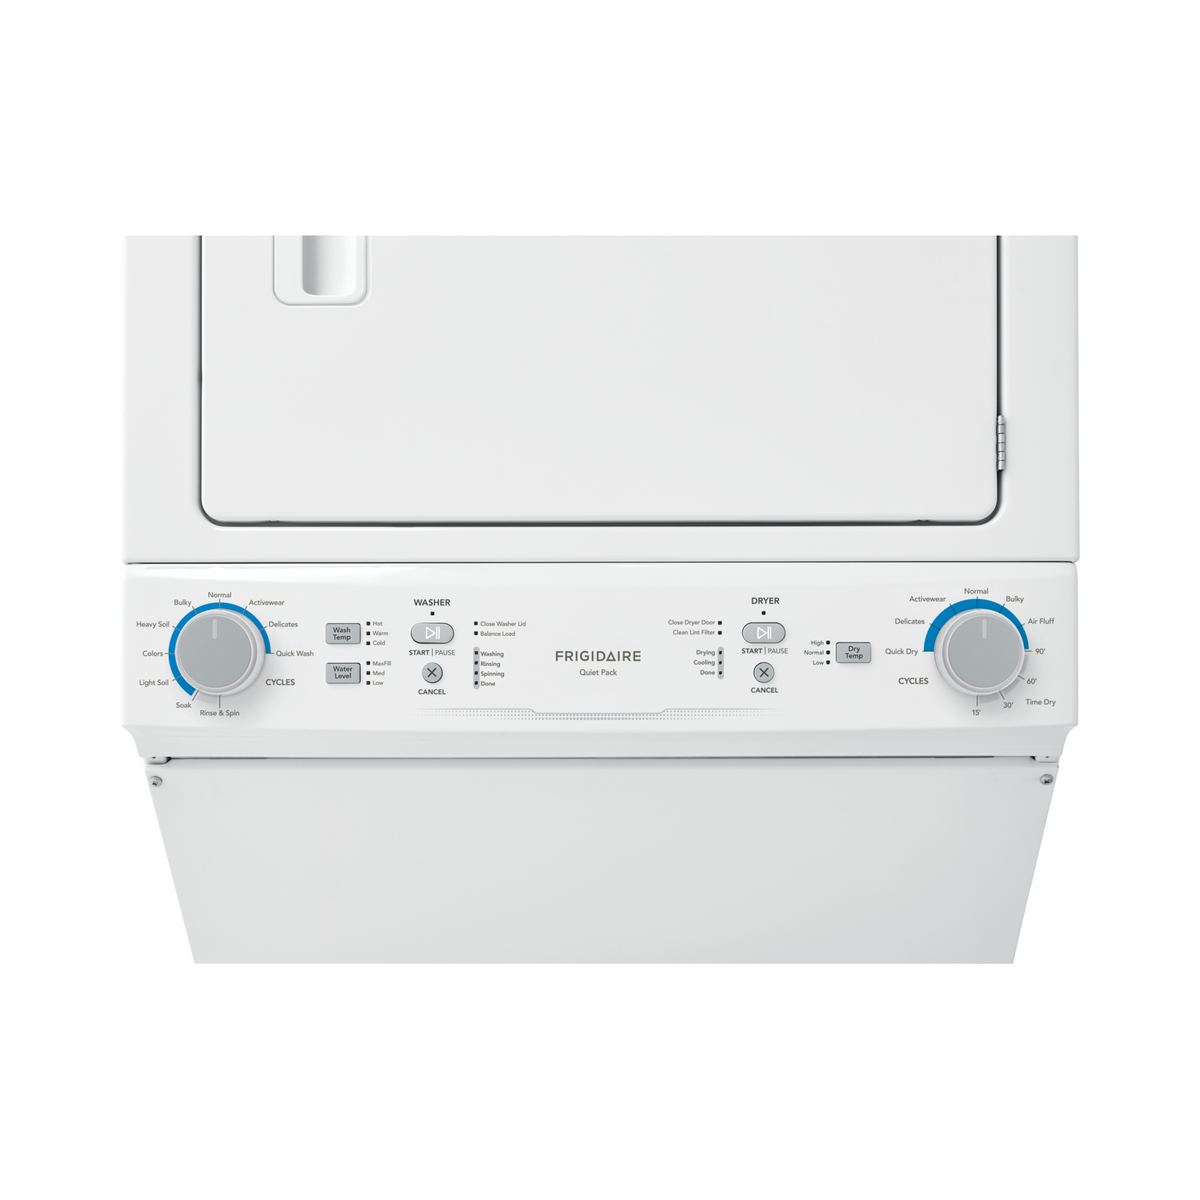 FRIGIDAIRE FLCE7522AW Electric Washer/Dryer Laundry Center